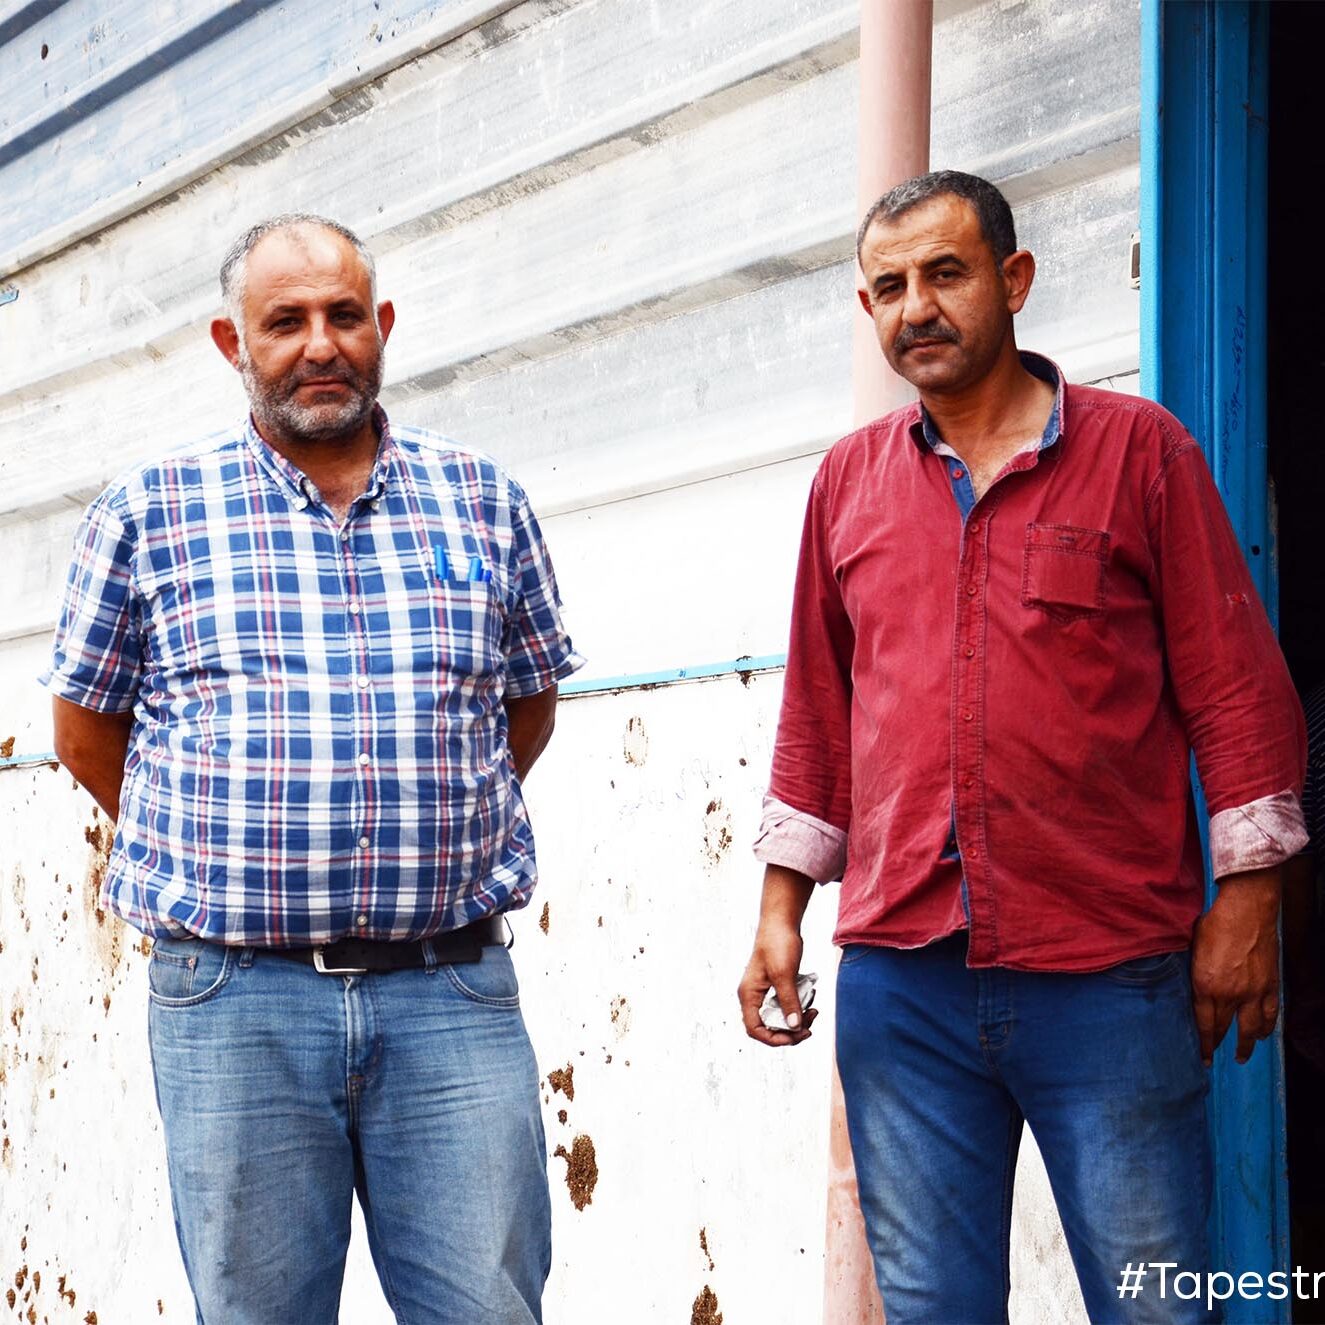 Thabet (left): "We work until we finish the day's produce of olives, even if it means working around the clock. Today we opened the press at five in the morning, and we'll see how things go. I expect it will be another late night."

Adel (right): "Olive oil is green gold and we need the continued support of local and international organizations to preserve it." - Thabet and Adel, olive farmers (Idhna, West Bank) [Photo: Brothers Thabet and Adel, standing in front of their olive oil processing facility in Idhna]